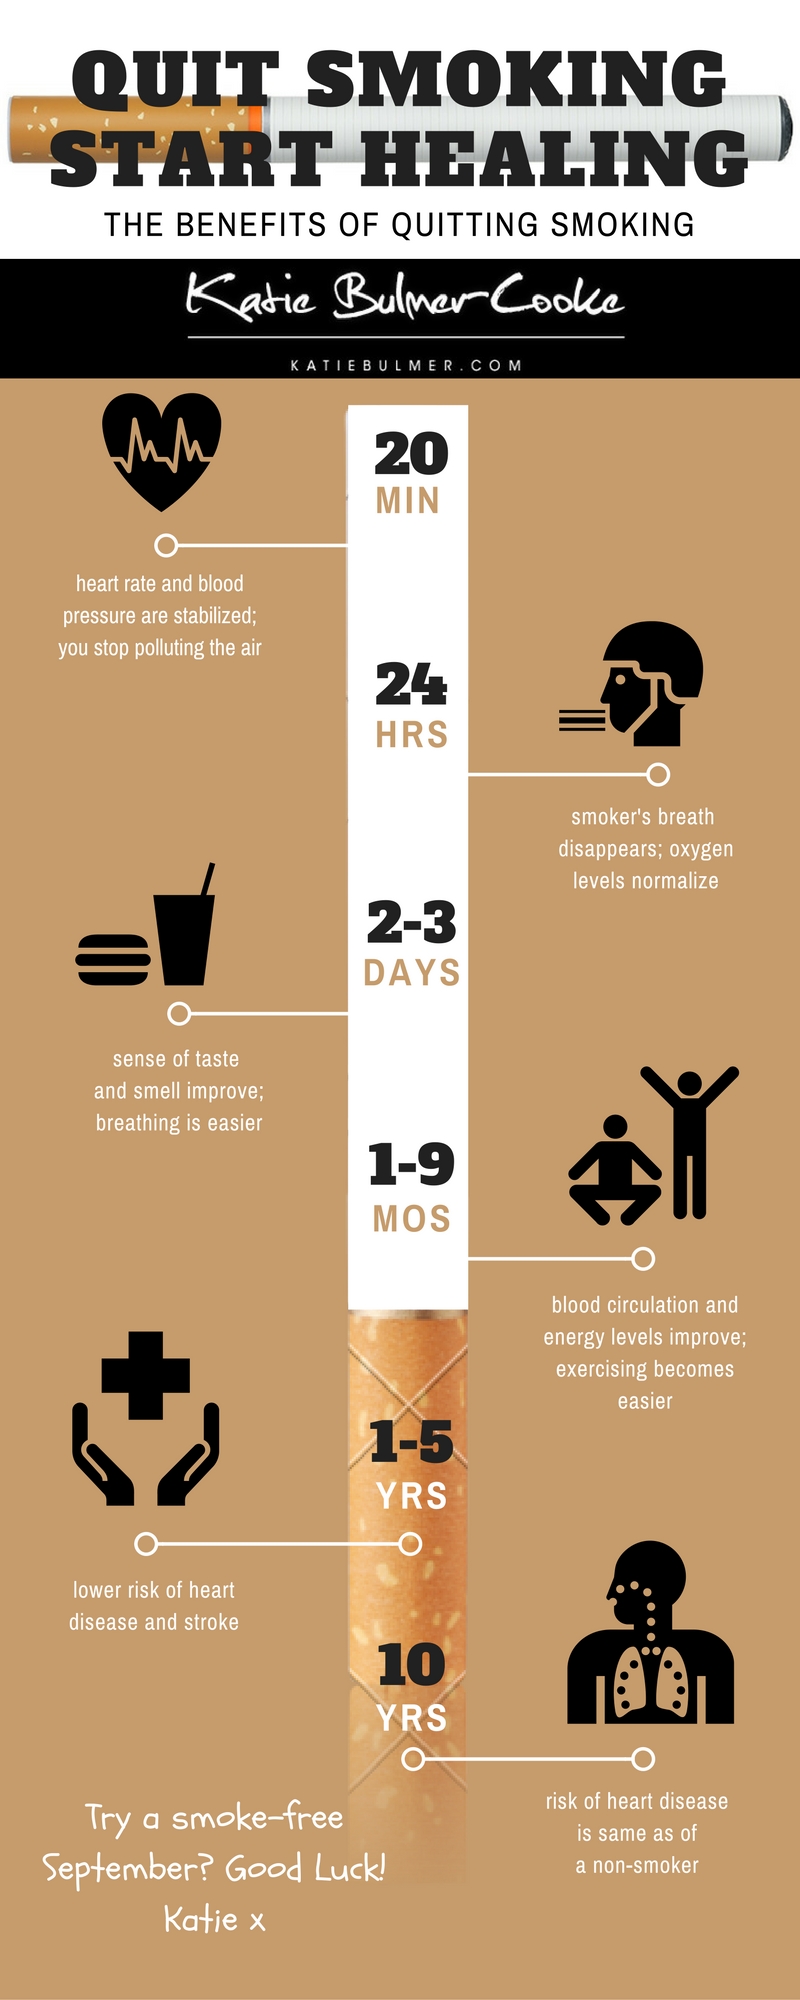 Benefits of Stopping Smoking Infographic - Health and Care